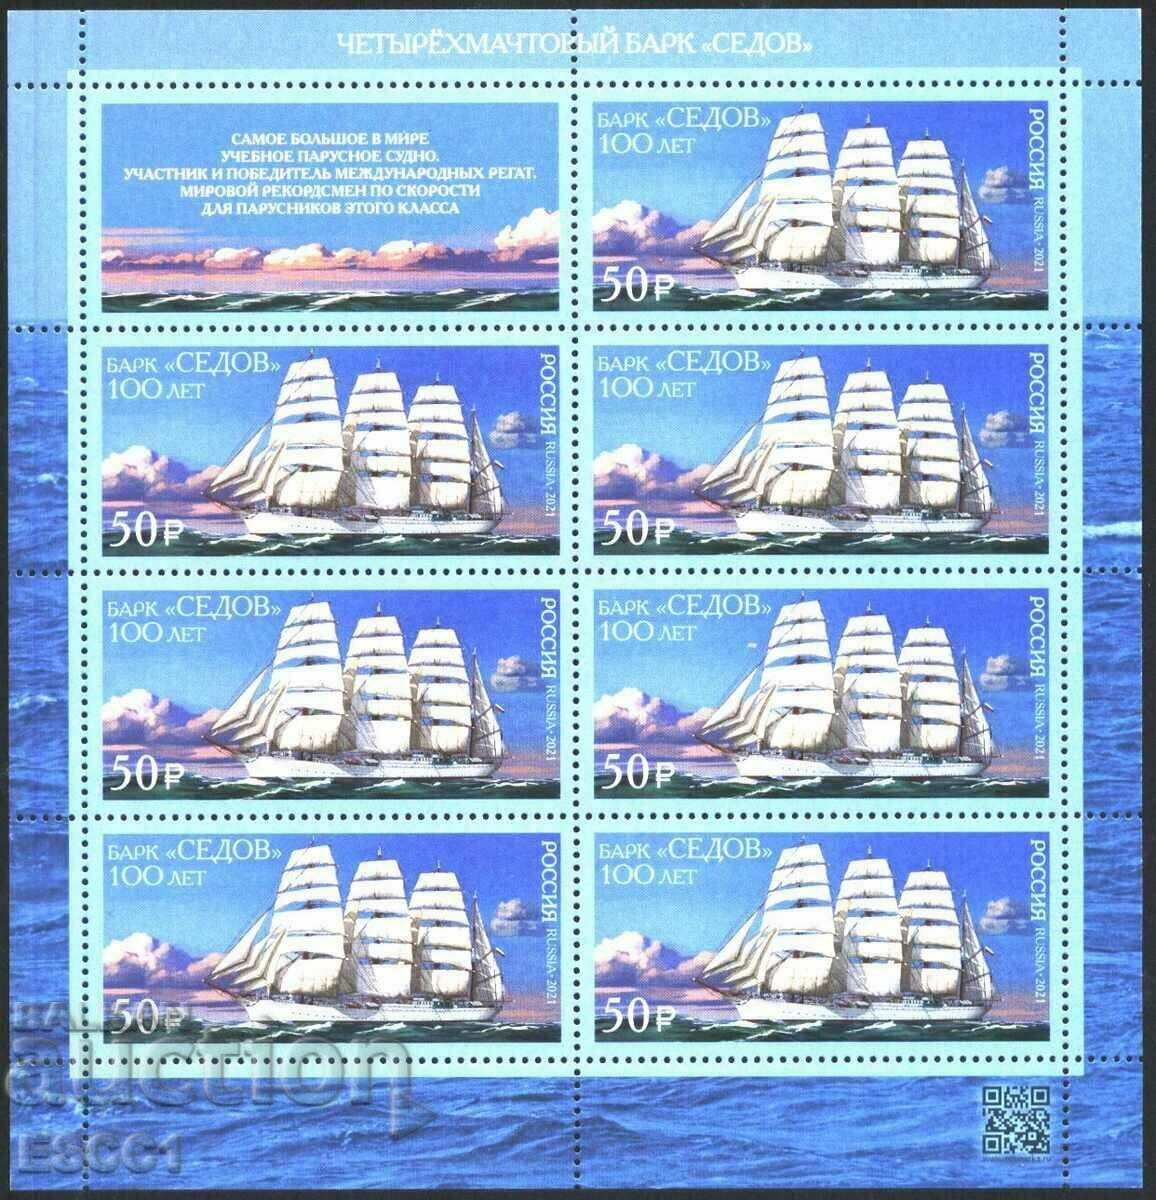 Clean stamp in small sheet Ship Platnohod 2021 from Russia